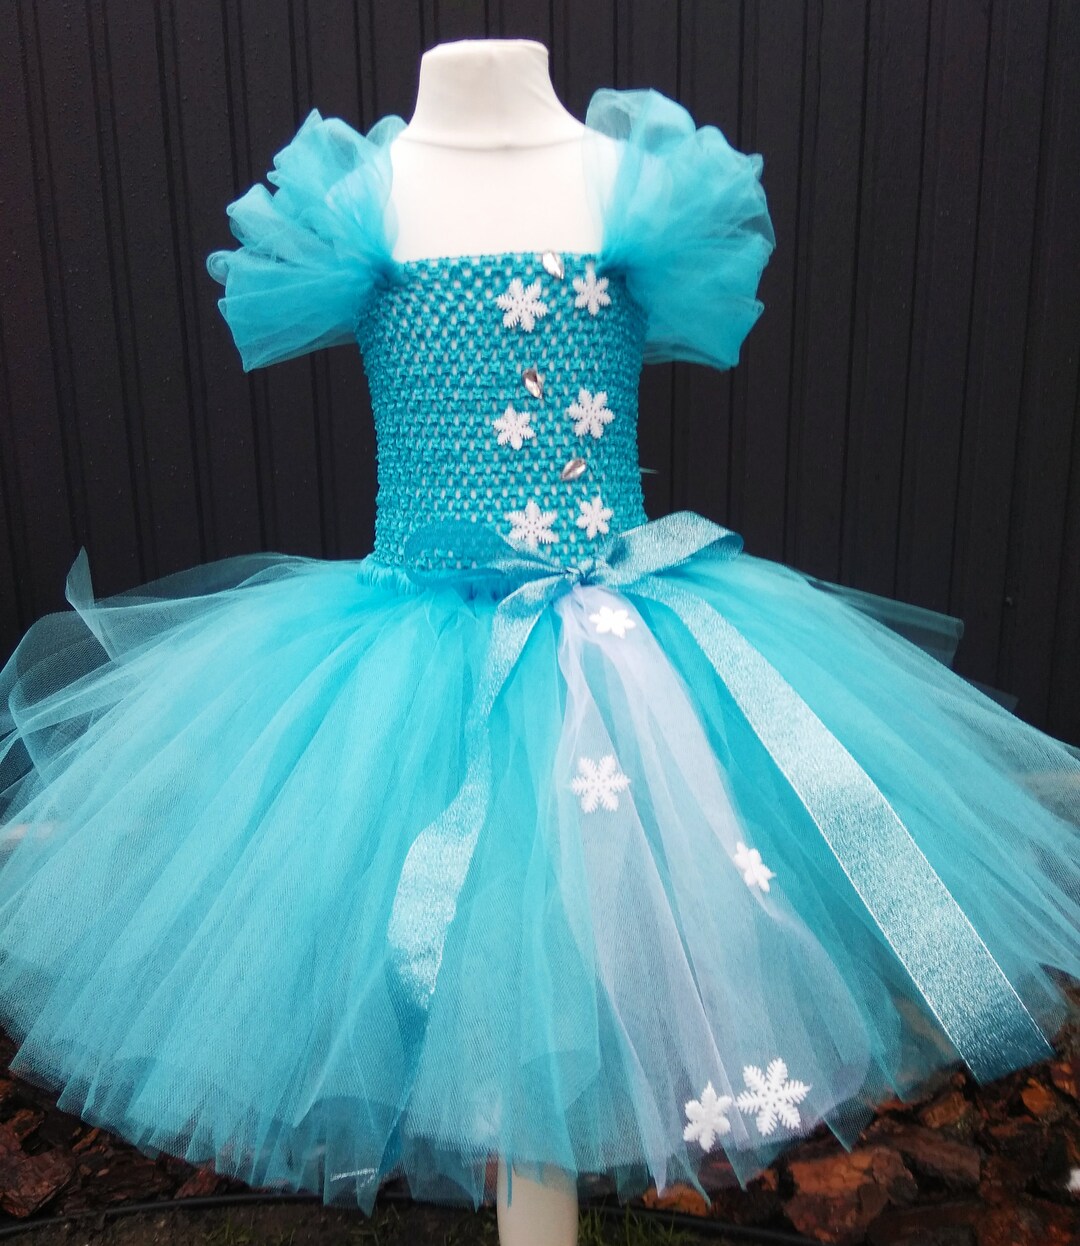 Stitch and Angel Party Tutu Outfit, Stitch Birthday Party Costume for Baby  Girl 